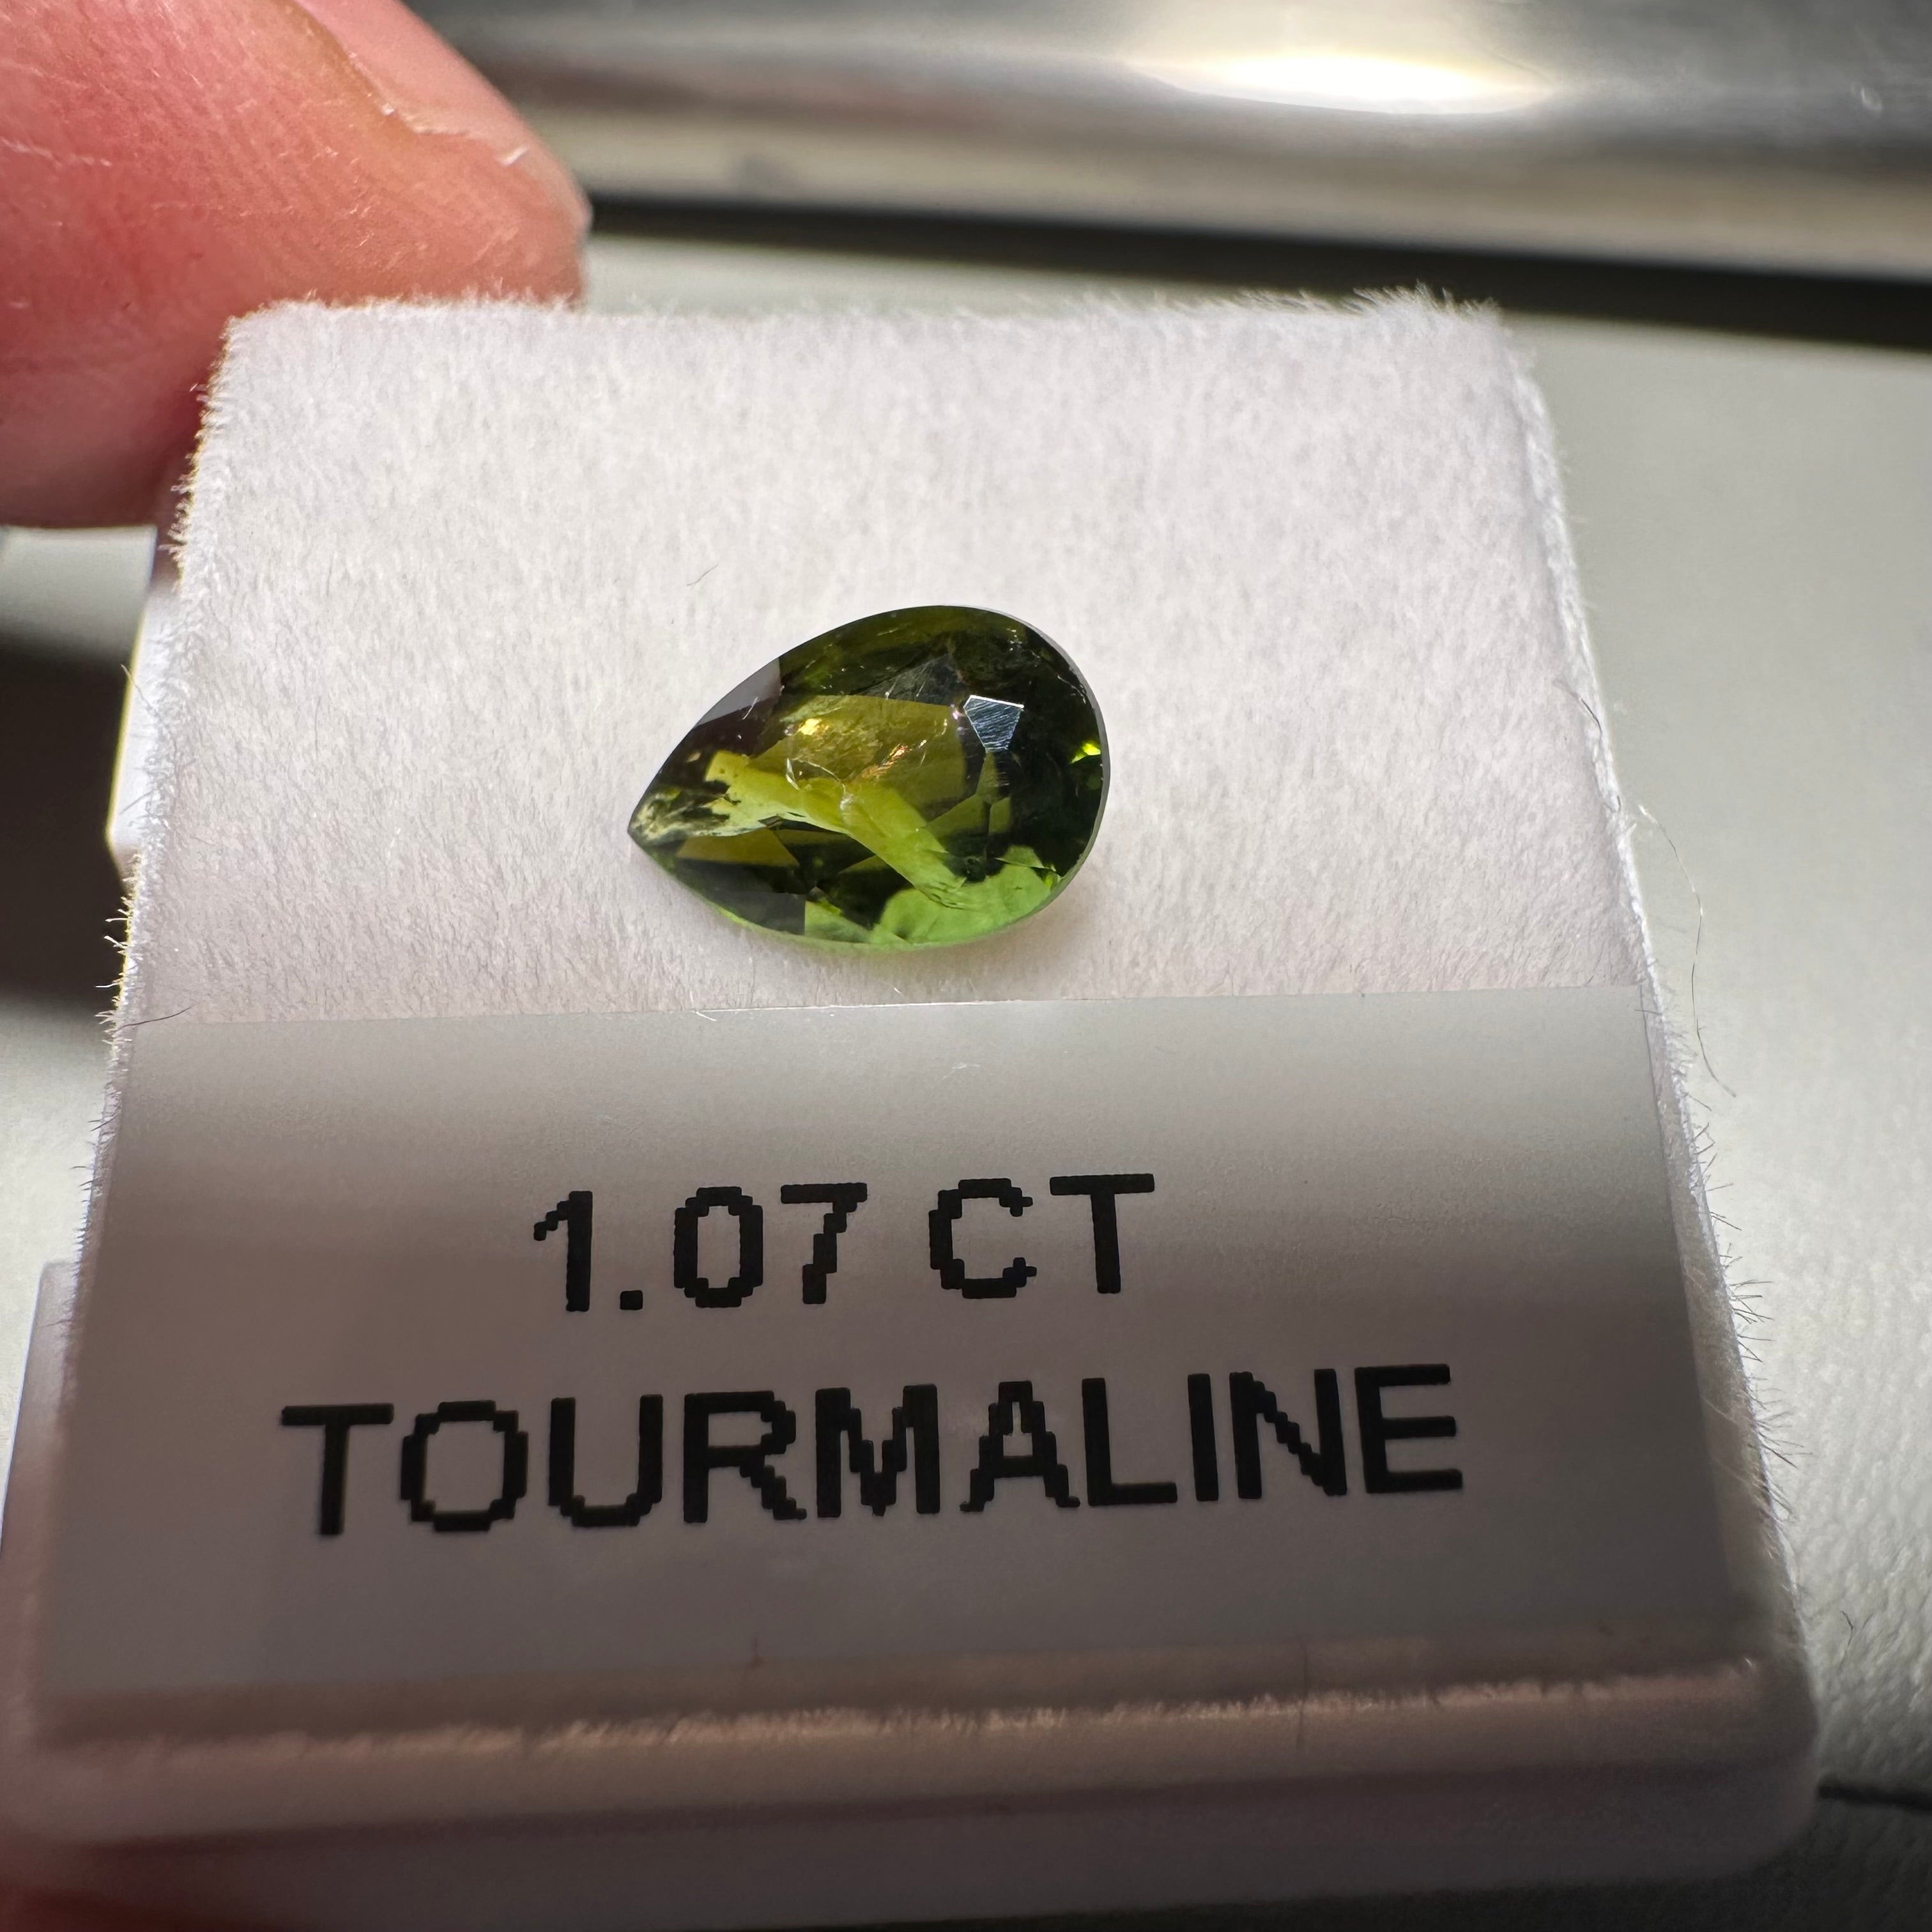 1.07ct Tanzanian Tourmaline, Untreated Unheated, native cut, included, chip on table but going cheap